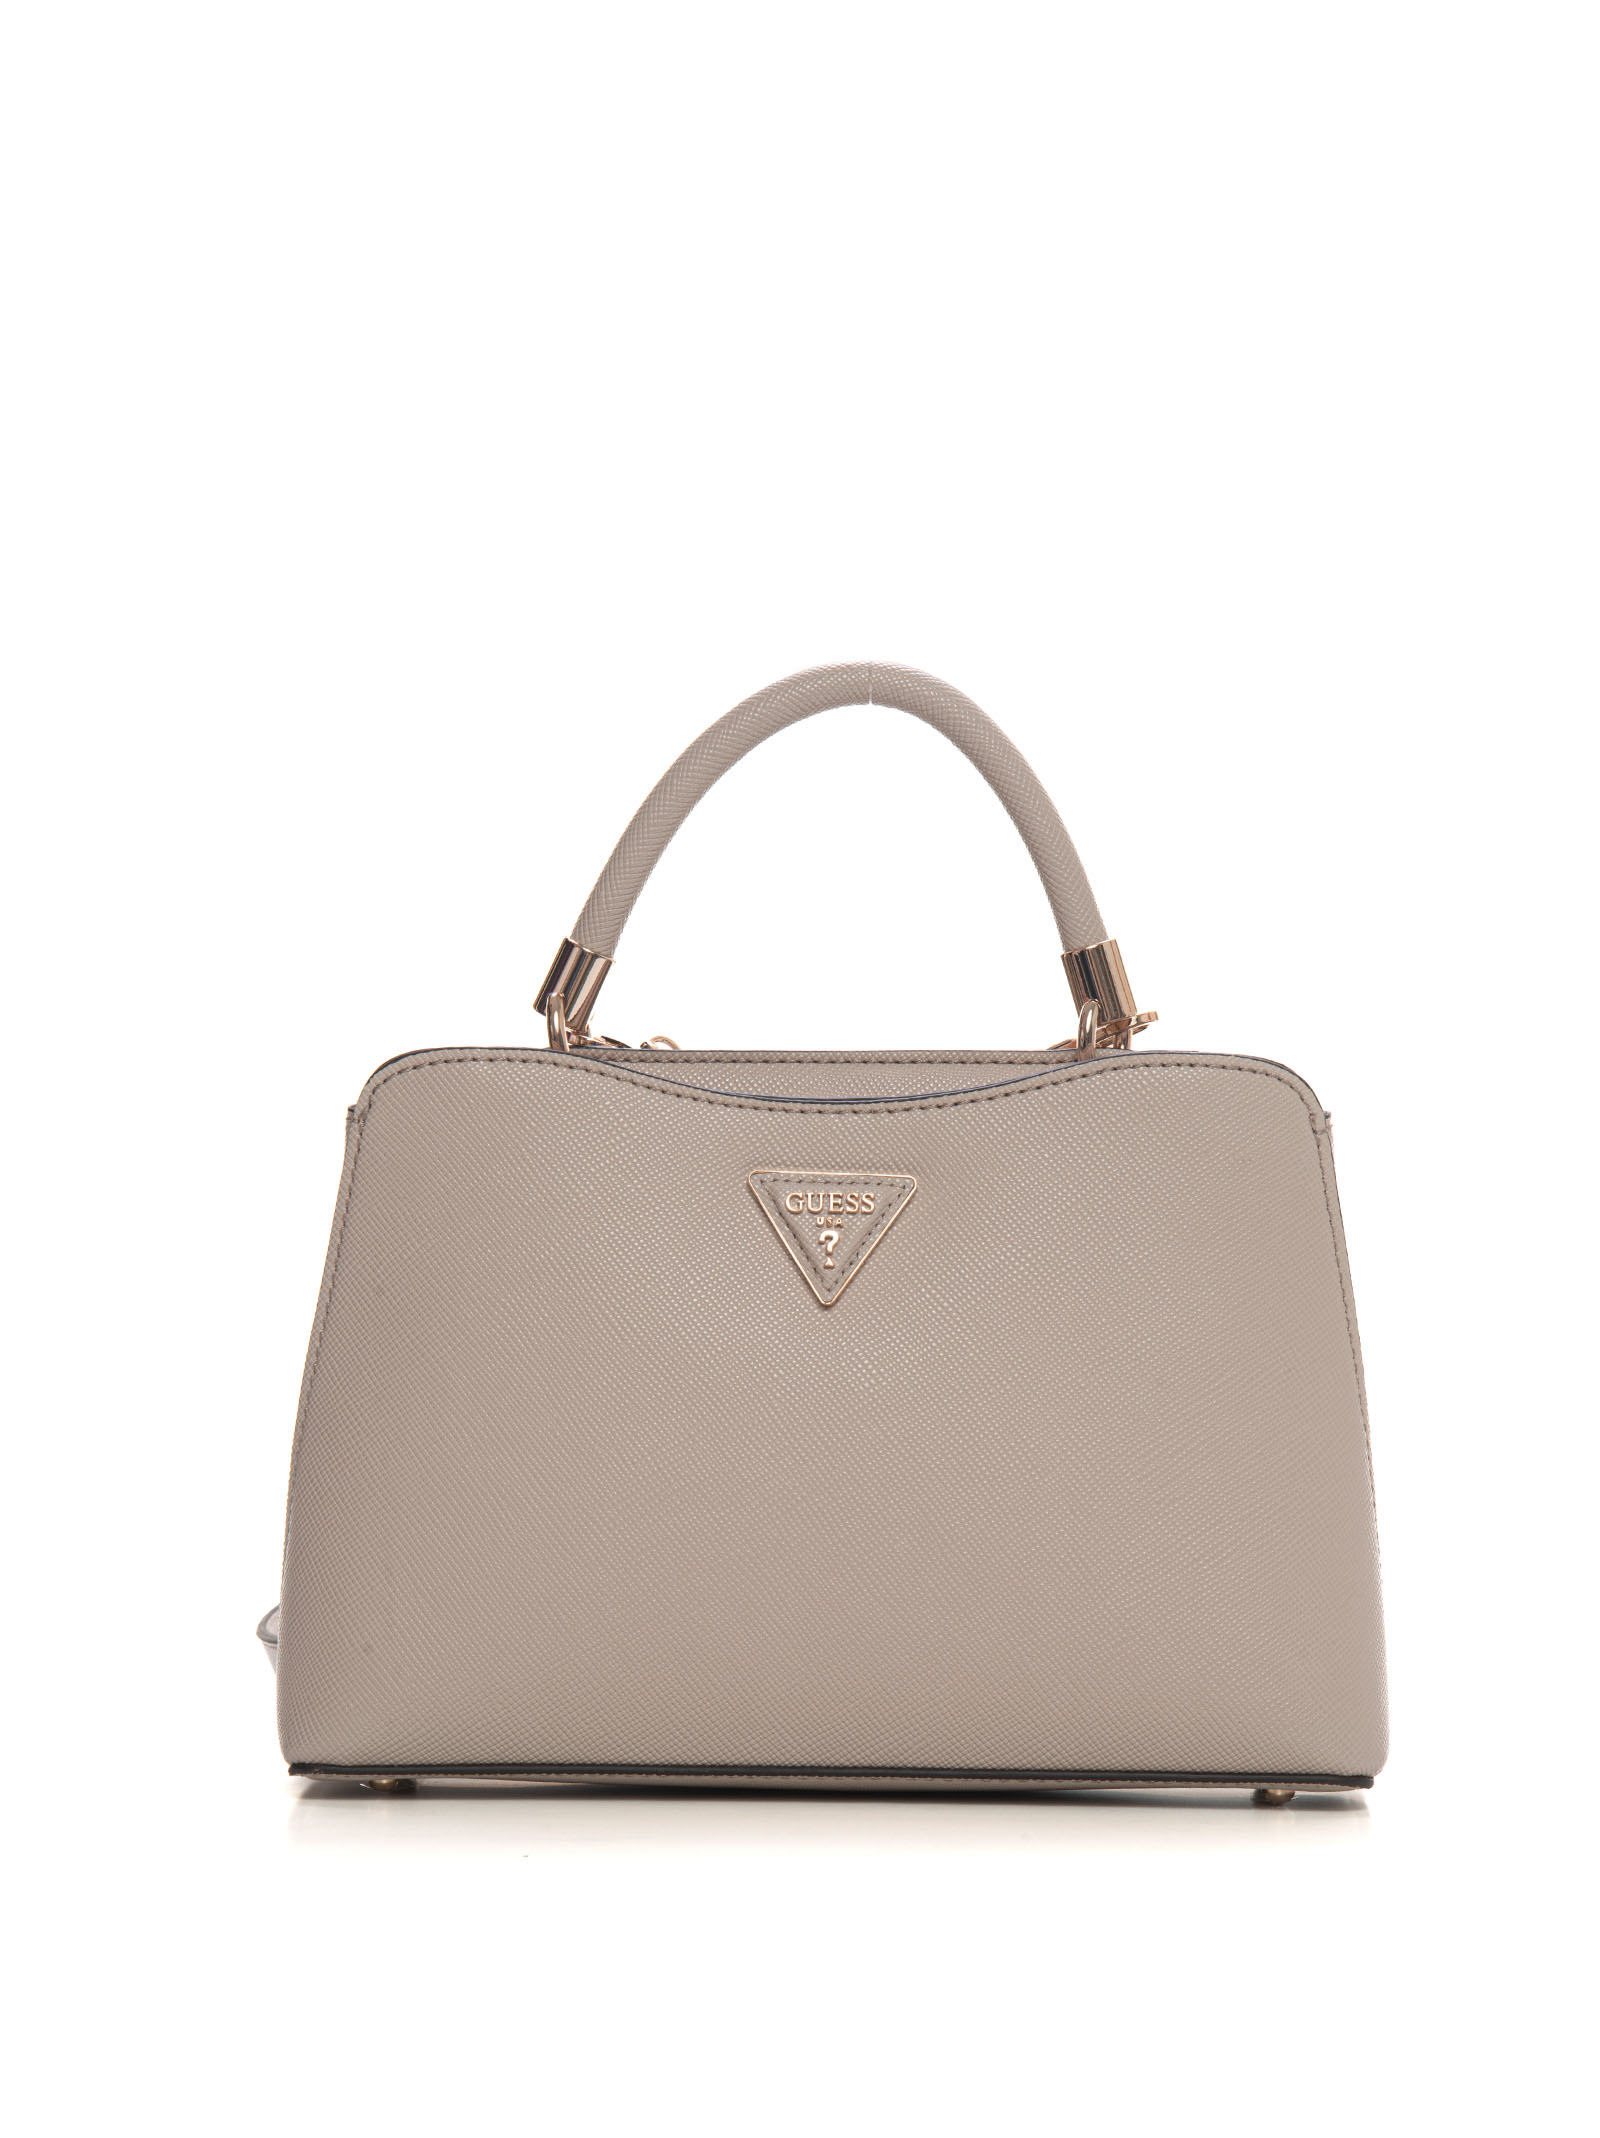 Guess Gizele Medium Size Bag In Taupe